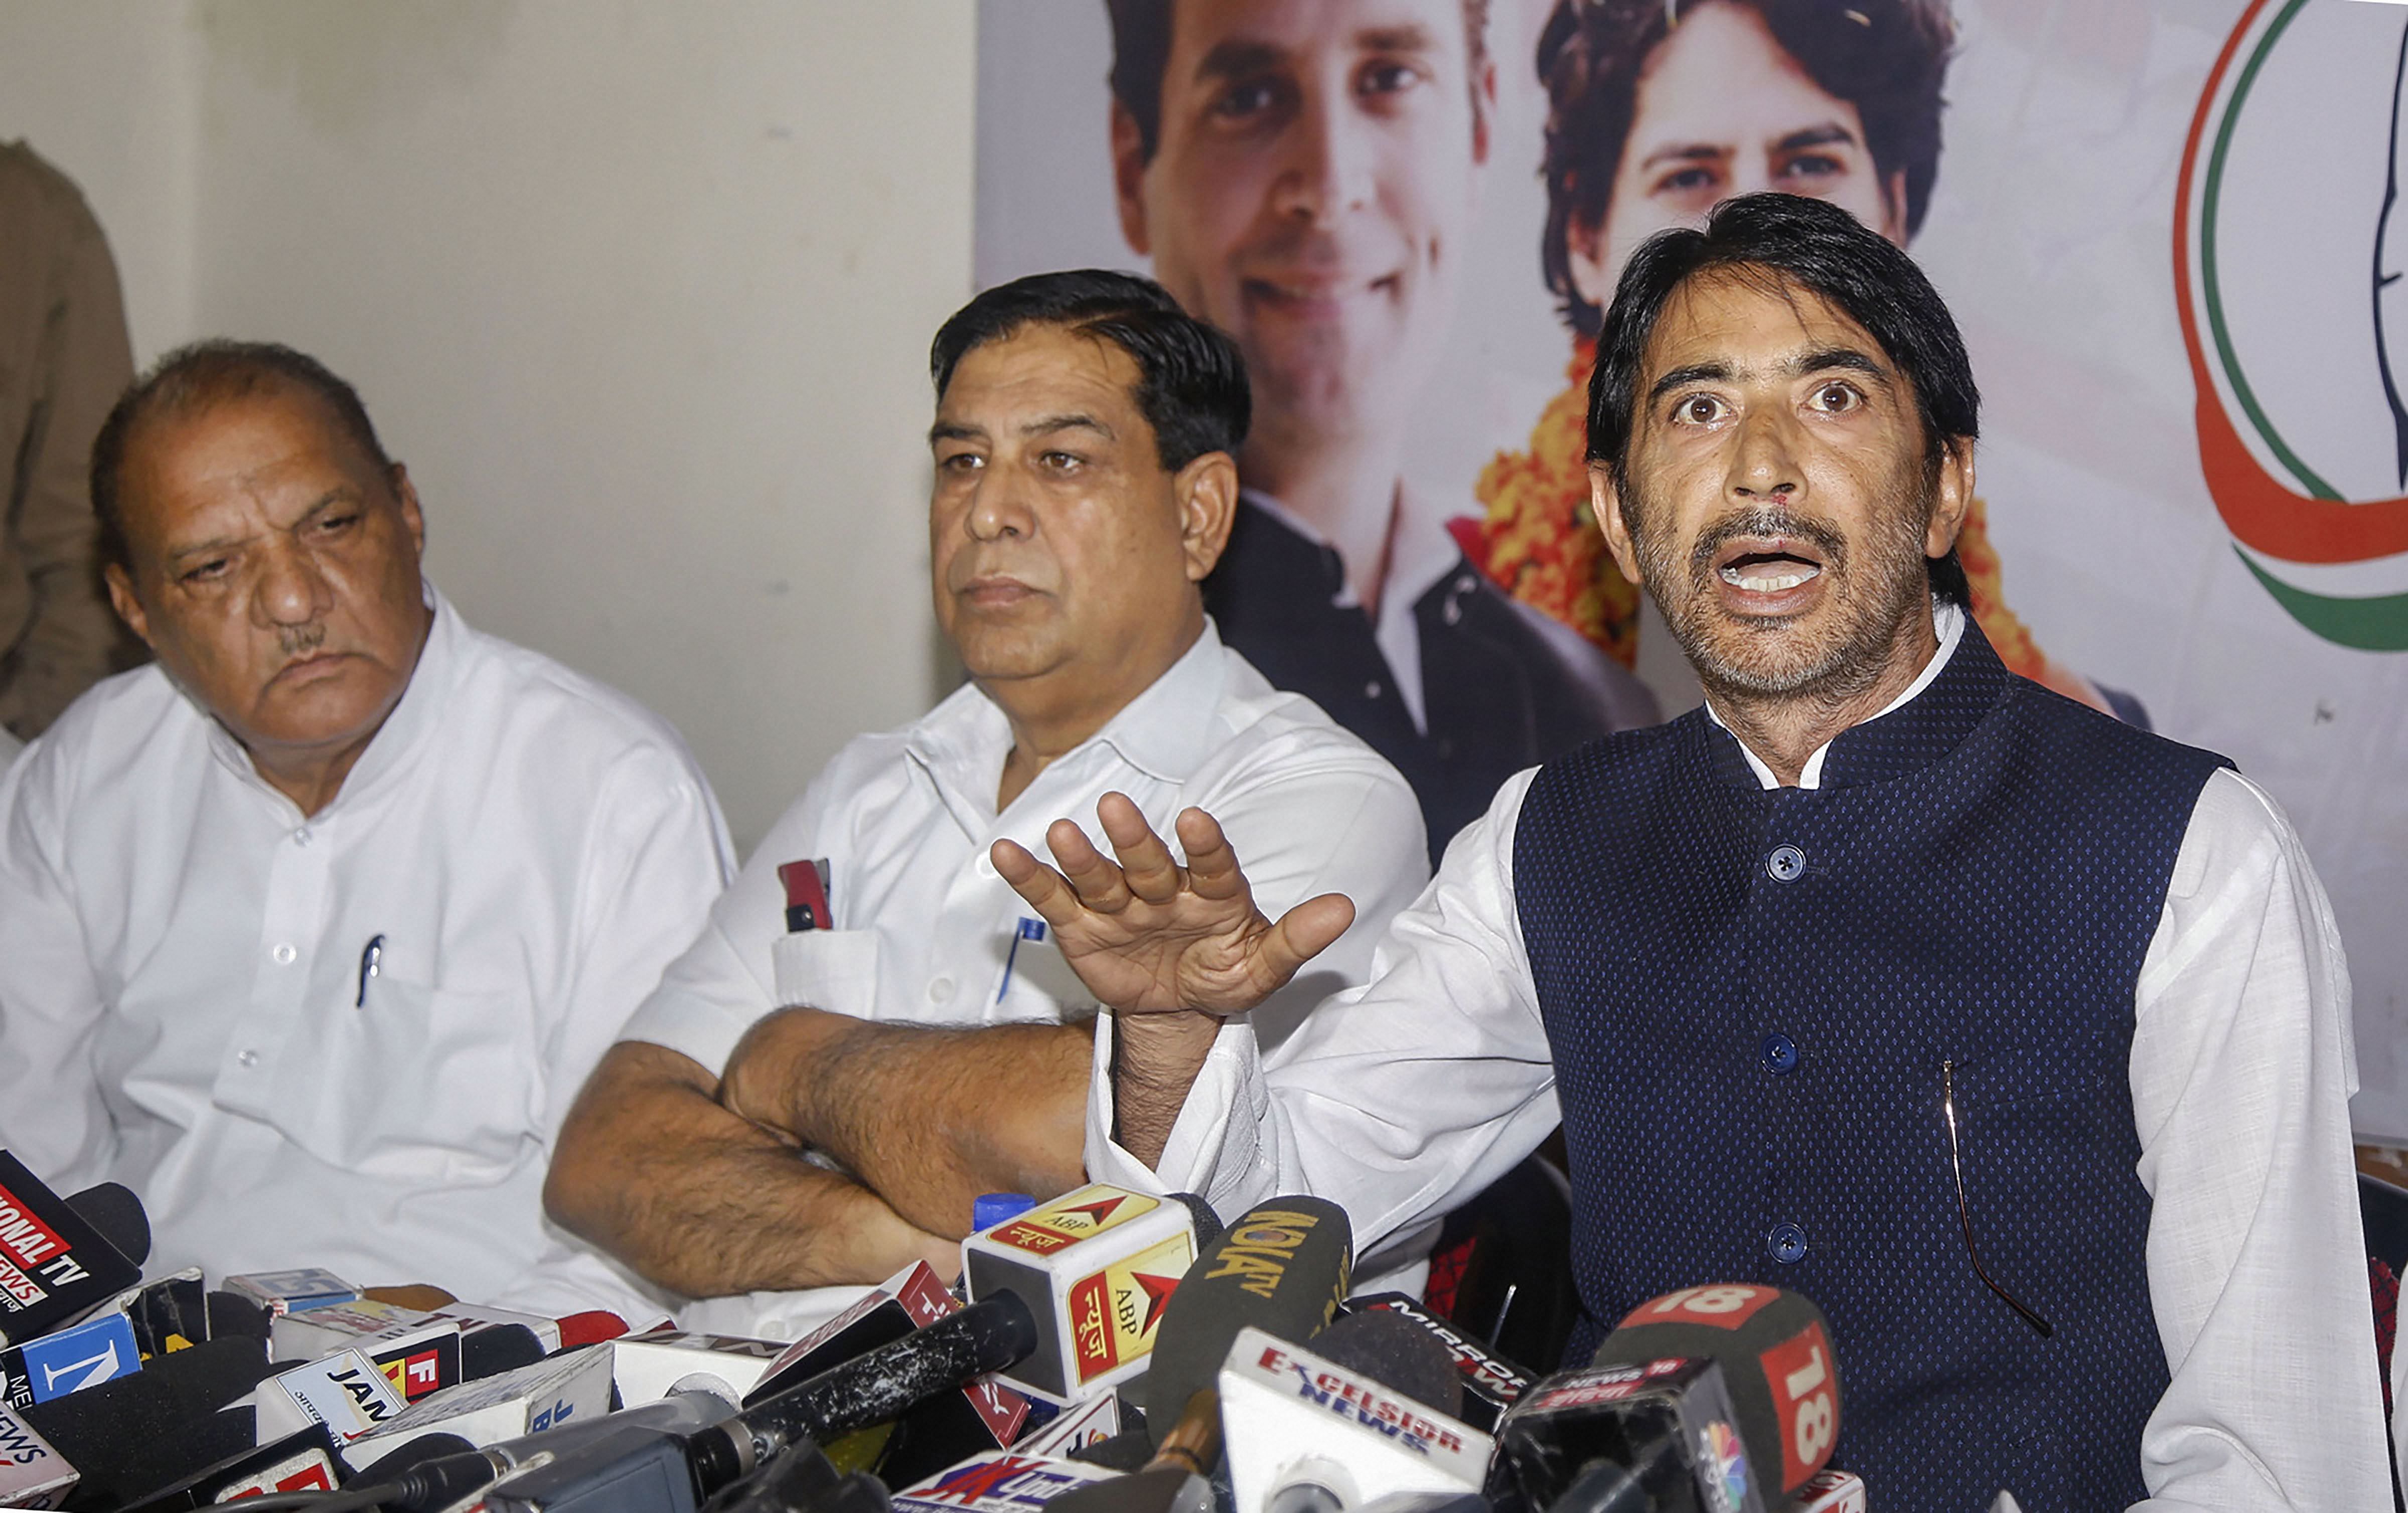 State Congress President G A Mir addresses a press conference, at the party office in Jammu. (PTI Photo)